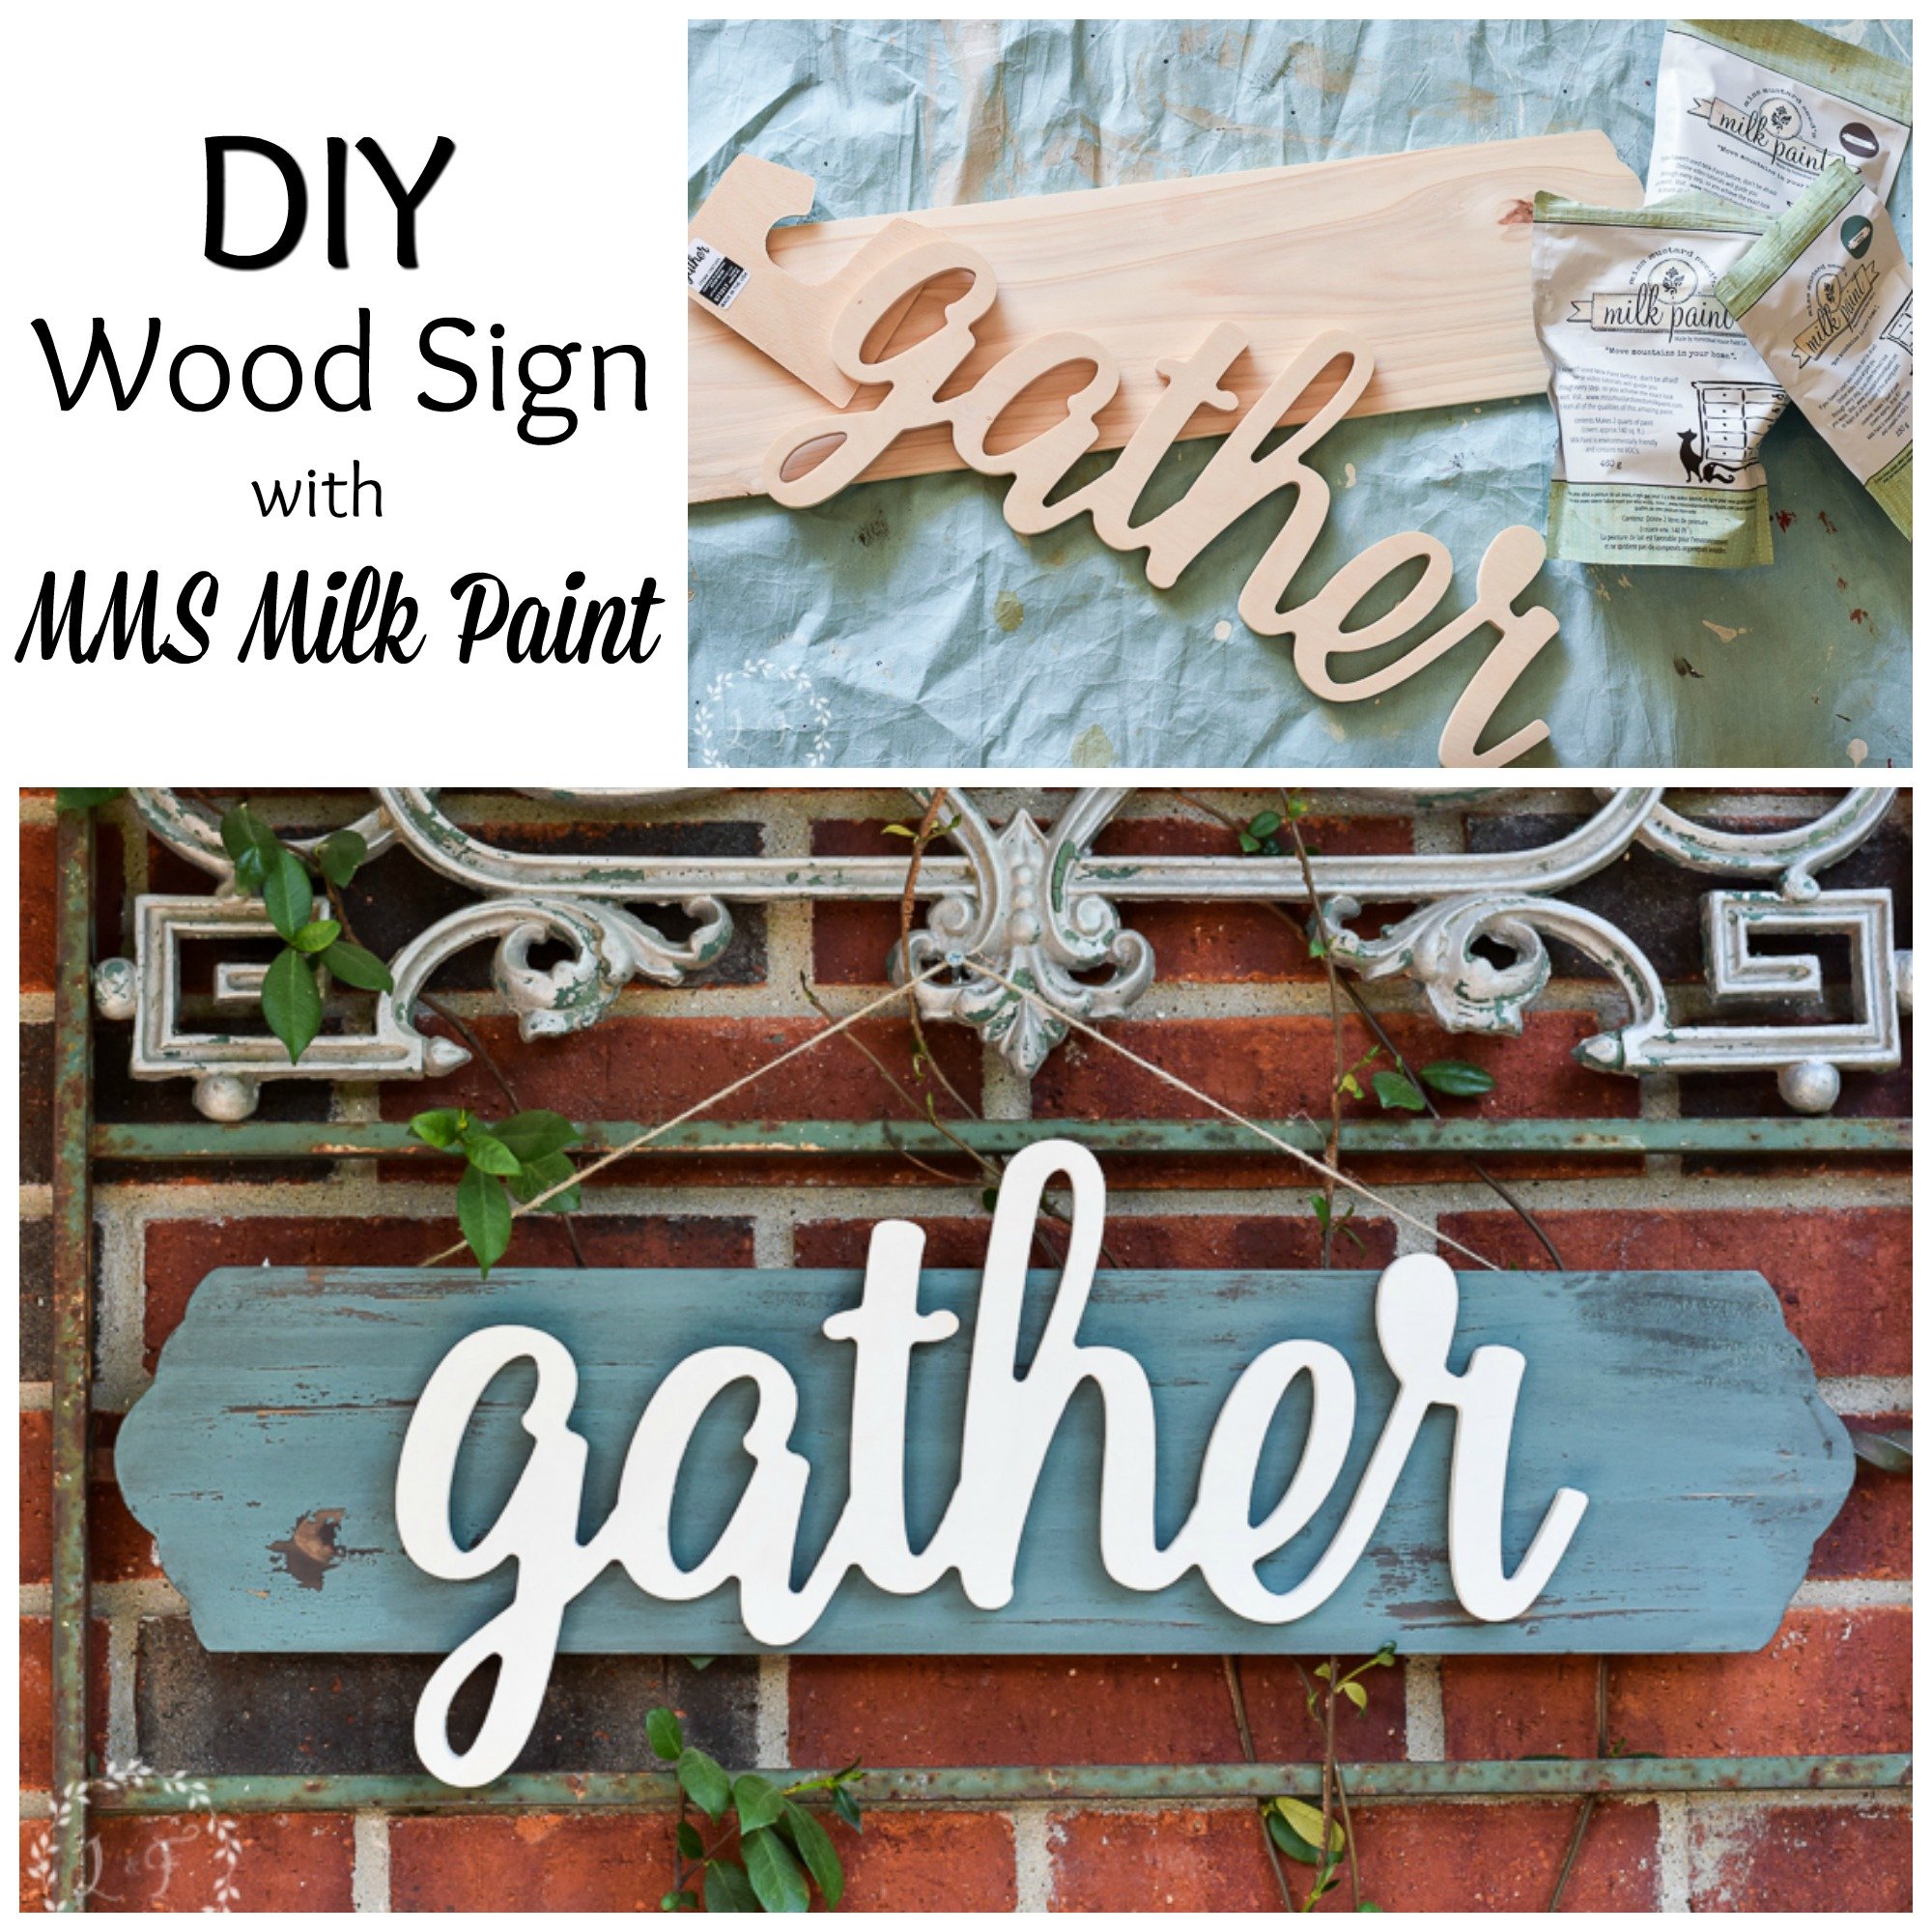 diy-gather-wood-sign-with-mms-milk-paint-1